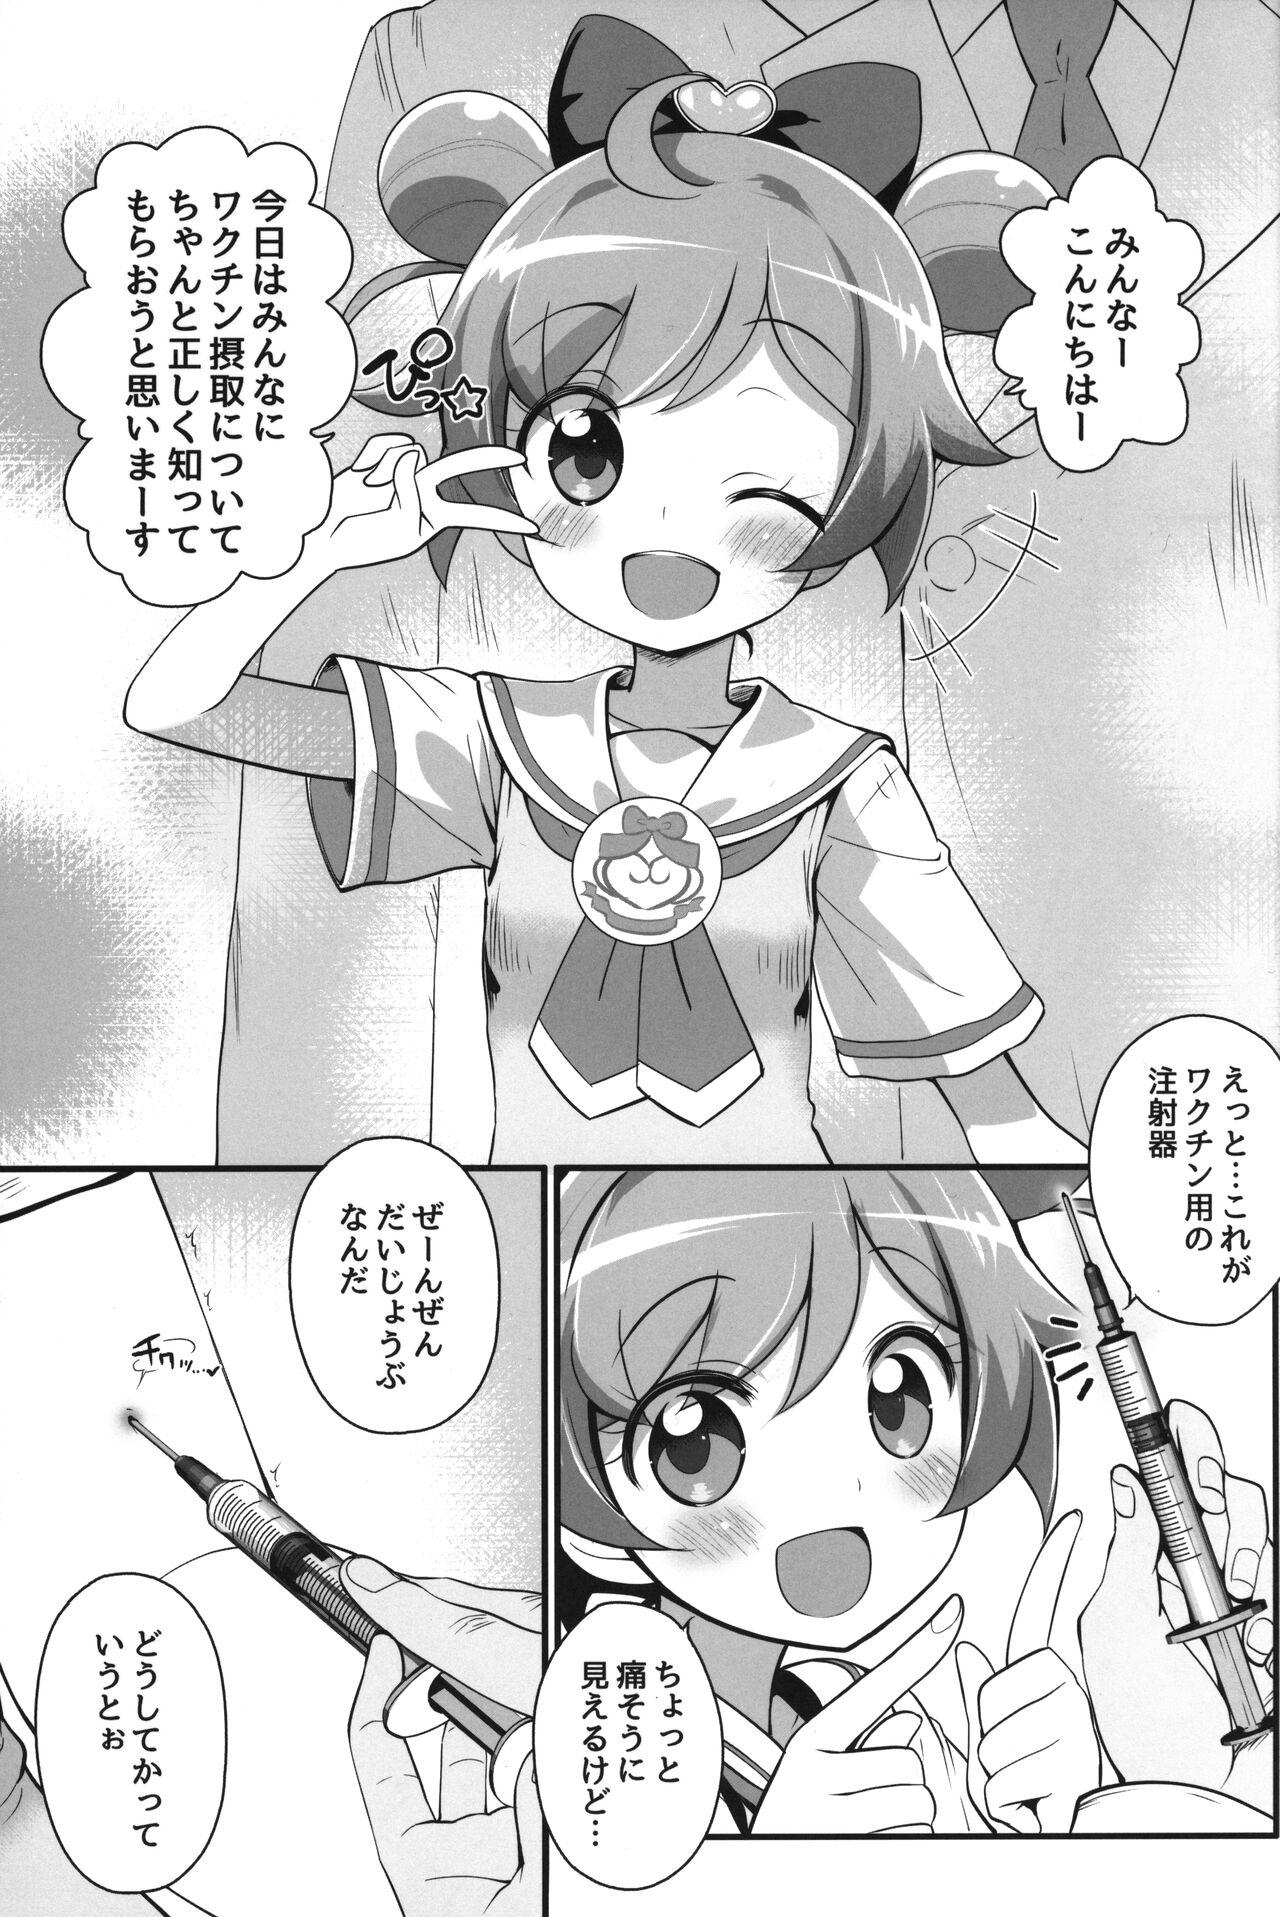 Rabo drug and drop 11 - Pripara Delicious party precure Mewkledreamy White Girl - Page 6